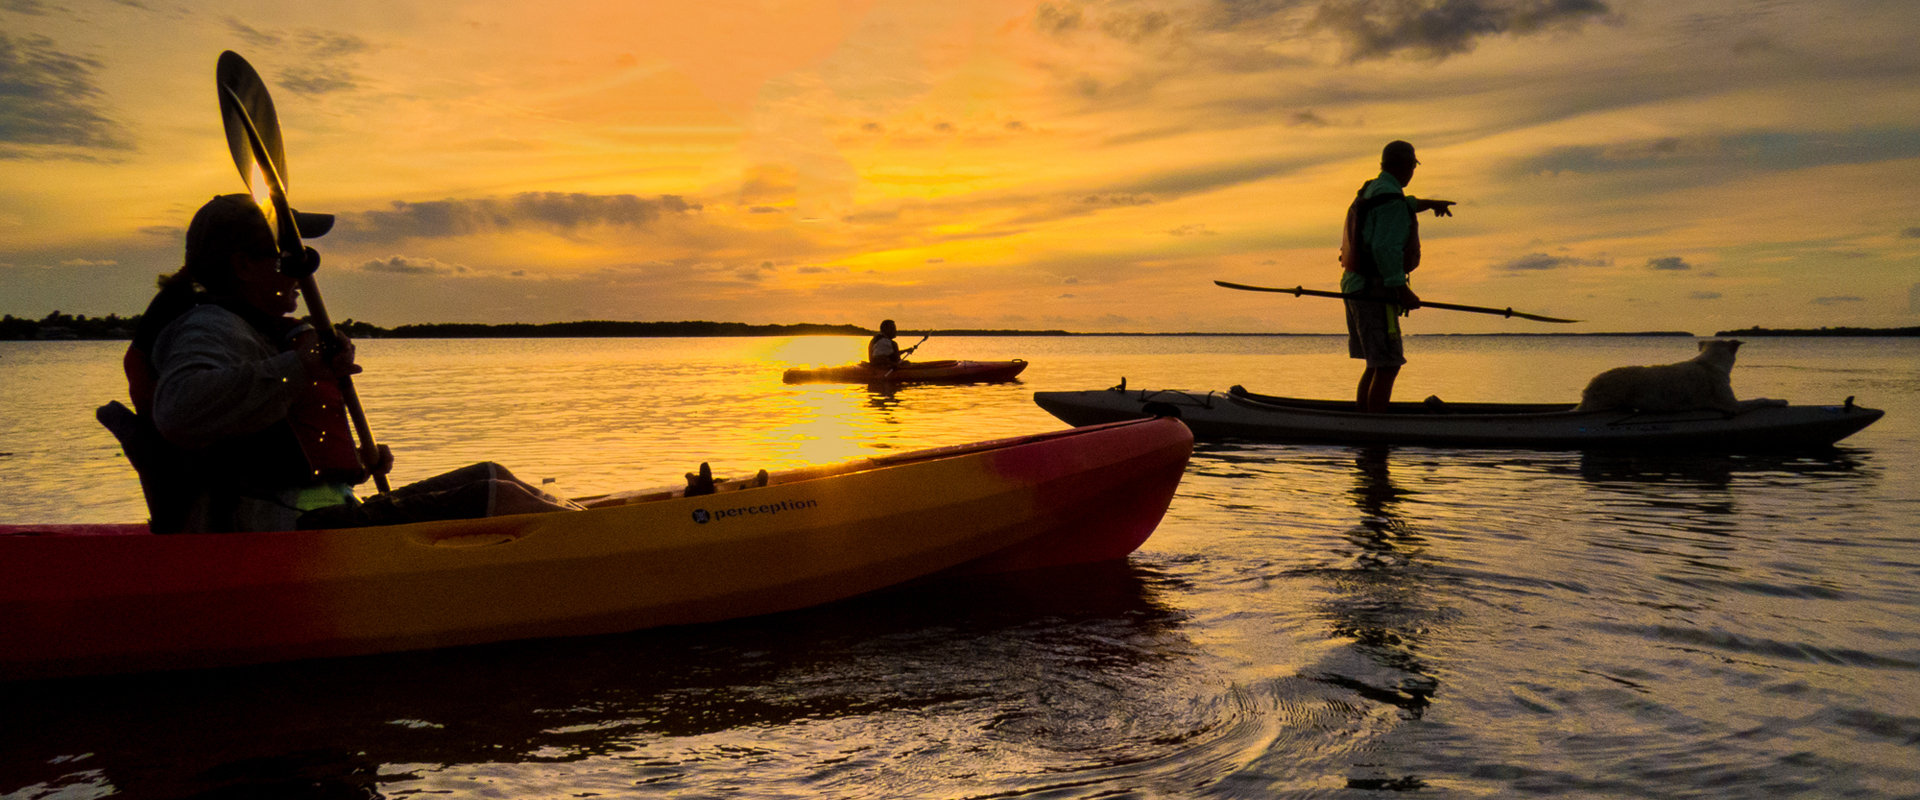 Canoers on the water at sunset